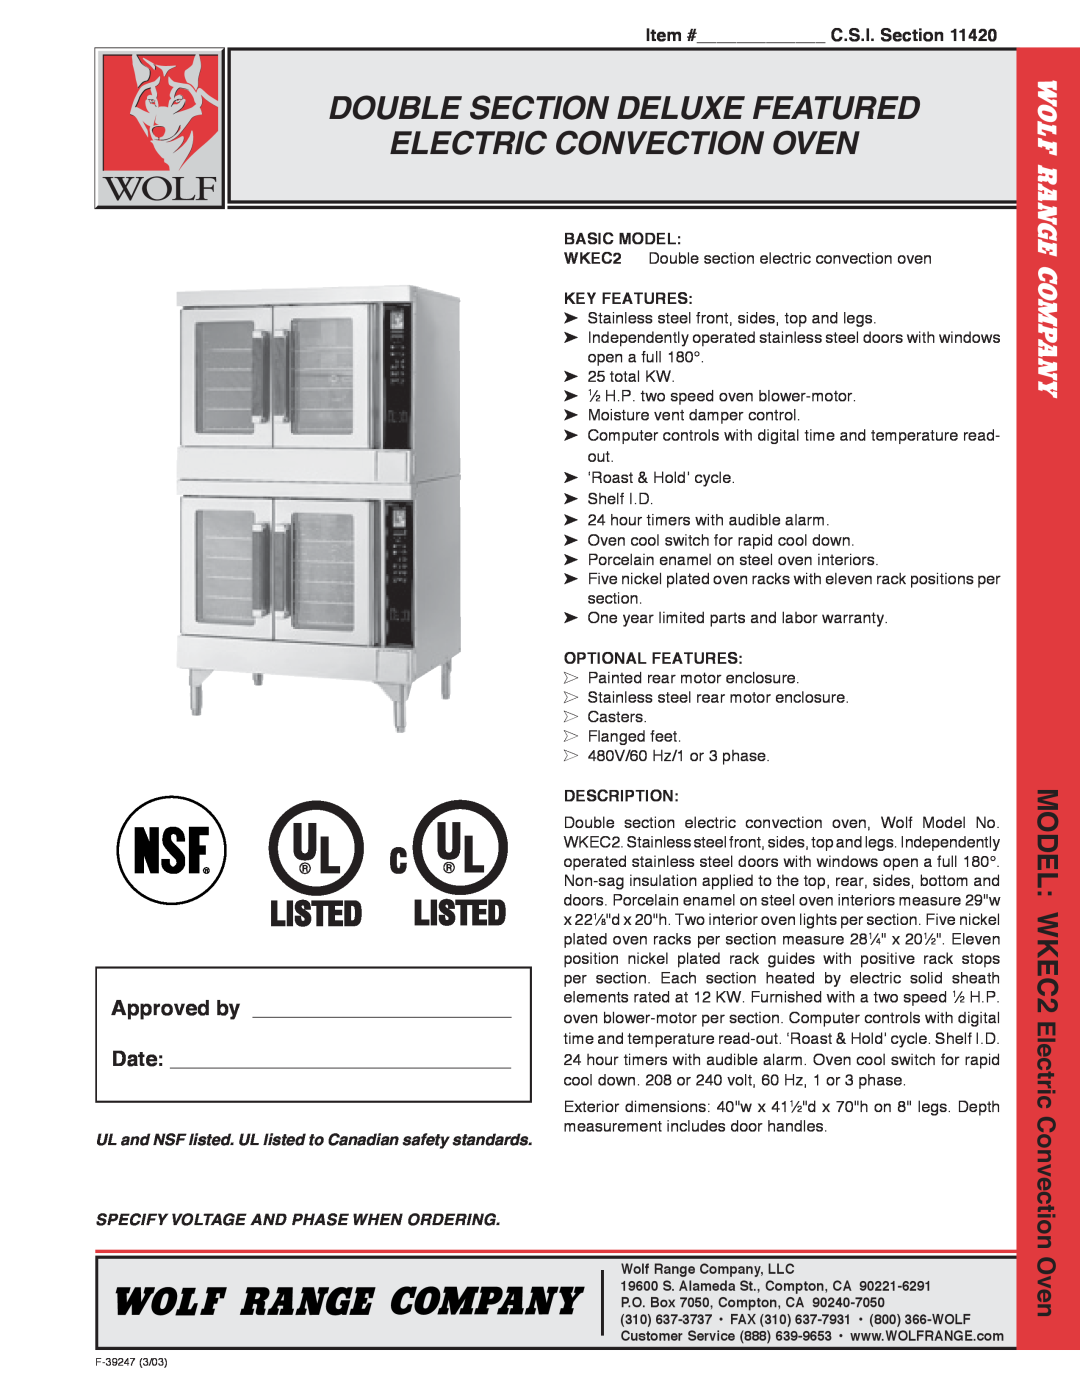 Wolf warranty Double Section Deluxe Featured Electric Convection Oven, MODEL WKEC2, Approved by Date 